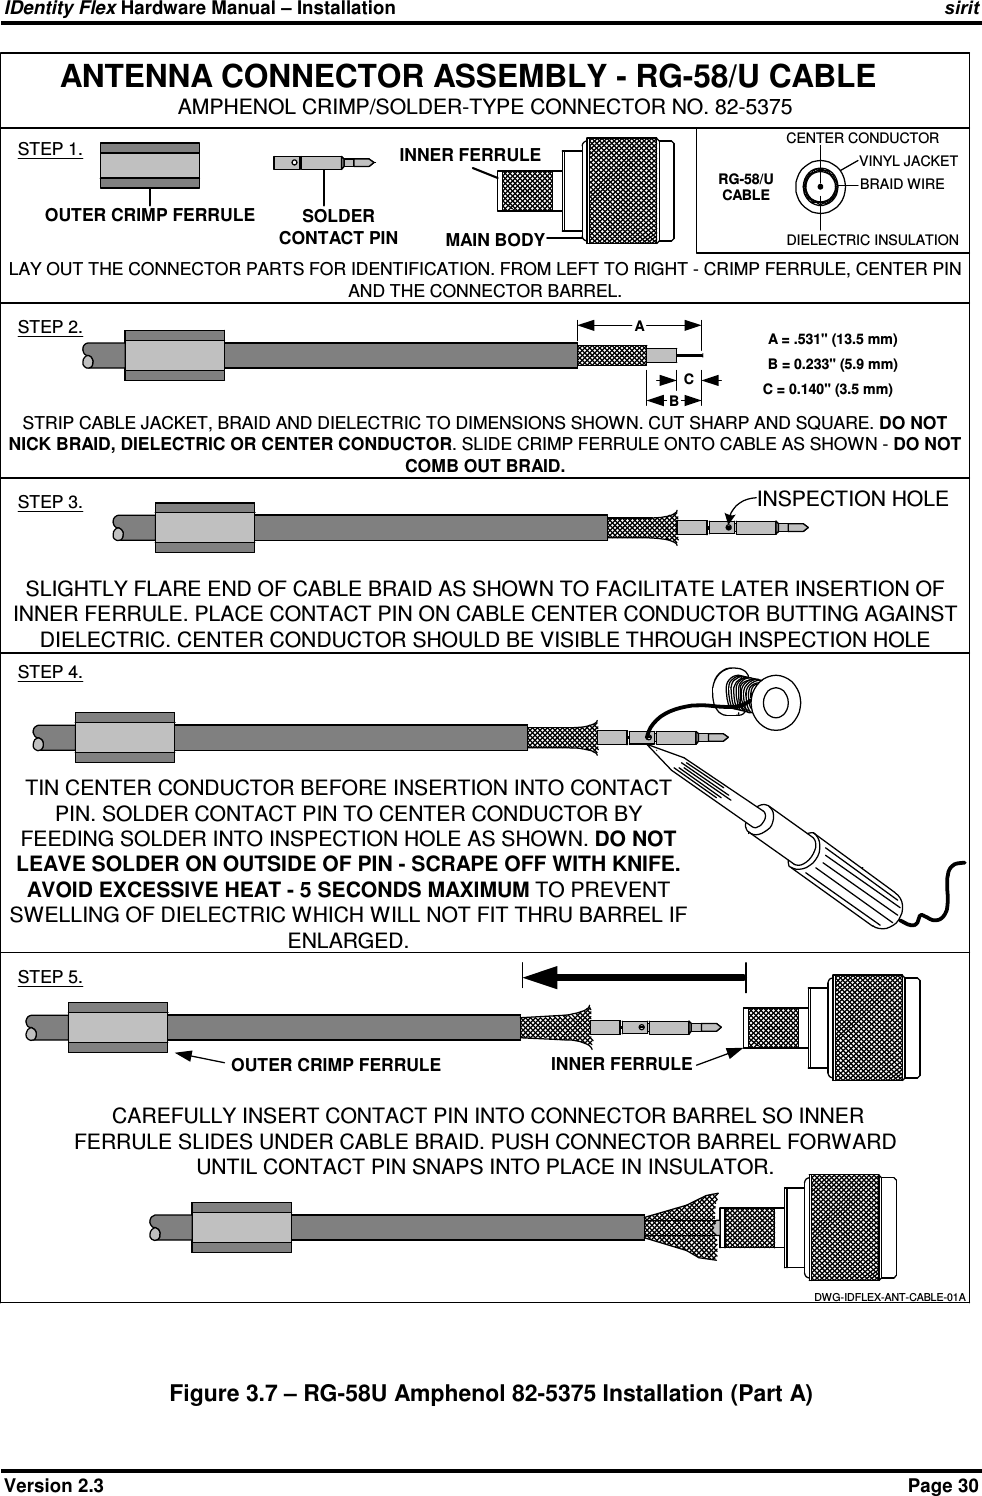 IDentity Flex Hardware Manual – Installation   sirit Version 2.3    Page 30 Figure 3.7 – RG-58U Amphenol 82-5375 Installation (Part A) ANTENNA CONNECTOR ASSEMBLY - RG-58/U CABLEAMPHENOL CRIMP/SOLDER-TYPE CONNECTOR NO. 82-5375A = .531&quot; (13.5 mm)ABCB = 0.233&quot; (5.9 mm)C = 0.140&quot; (3.5 mm)STEP 1.LAY OUT THE CONNECTOR PARTS FOR IDENTIFICATION. FROM LEFT TO RIGHT - CRIMP FERRULE, CENTER PINAND THE CONNECTOR BARREL.STEP 2.STRIP CABLE JACKET, BRAID AND DIELECTRIC TO DIMENSIONS SHOWN. CUT SHARP AND SQUARE. DO NOTNICK BRAID, DIELECTRIC OR CENTER CONDUCTOR. SLIDE CRIMP FERRULE ONTO CABLE AS SHOWN - DO NOTCOMB OUT BRAID.STEP 3.SLIGHTLY FLARE END OF CABLE BRAID AS SHOWN TO FACILITATE LATER INSERTION OFINNER FERRULE. PLACE CONTACT PIN ON CABLE CENTER CONDUCTOR BUTTING AGAINSTDIELECTRIC. CENTER CONDUCTOR SHOULD BE VISIBLE THROUGH INSPECTION HOLESOLDERCONTACT PINOUTER CRIMP FERRULEINNER FERRULEMAIN BODYSTEP 4.TIN CENTER CONDUCTOR BEFORE INSERTION INTO CONTACTPIN. SOLDER CONTACT PIN TO CENTER CONDUCTOR BYFEEDING SOLDER INTO INSPECTION HOLE AS SHOWN. DO NOTLEAVE SOLDER ON OUTSIDE OF PIN - SCRAPE OFF WITH KNIFE.AVOID EXCESSIVE HEAT - 5 SECONDS MAXIMUM TO PREVENTSWELLING OF DIELECTRIC WHICH WILL NOT FIT THRU BARREL IFENLARGED.STEP 5.INNER FERRULE CAREFULLY INSERT CONTACT PIN INTO CONNECTOR BARREL SO INNERFERRULE SLIDES UNDER CABLE BRAID. PUSH CONNECTOR BARREL FORWARDUNTIL CONTACT PIN SNAPS INTO PLACE IN INSULATOR.CENTER CONDUCTORVINYL JACKETBRAID WIREDIELECTRIC INSULATIONRG-58/UCABLEDWG-IDFLEX-ANT-CABLE-01AINSPECTION HOLEOUTER CRIMP FERRULE